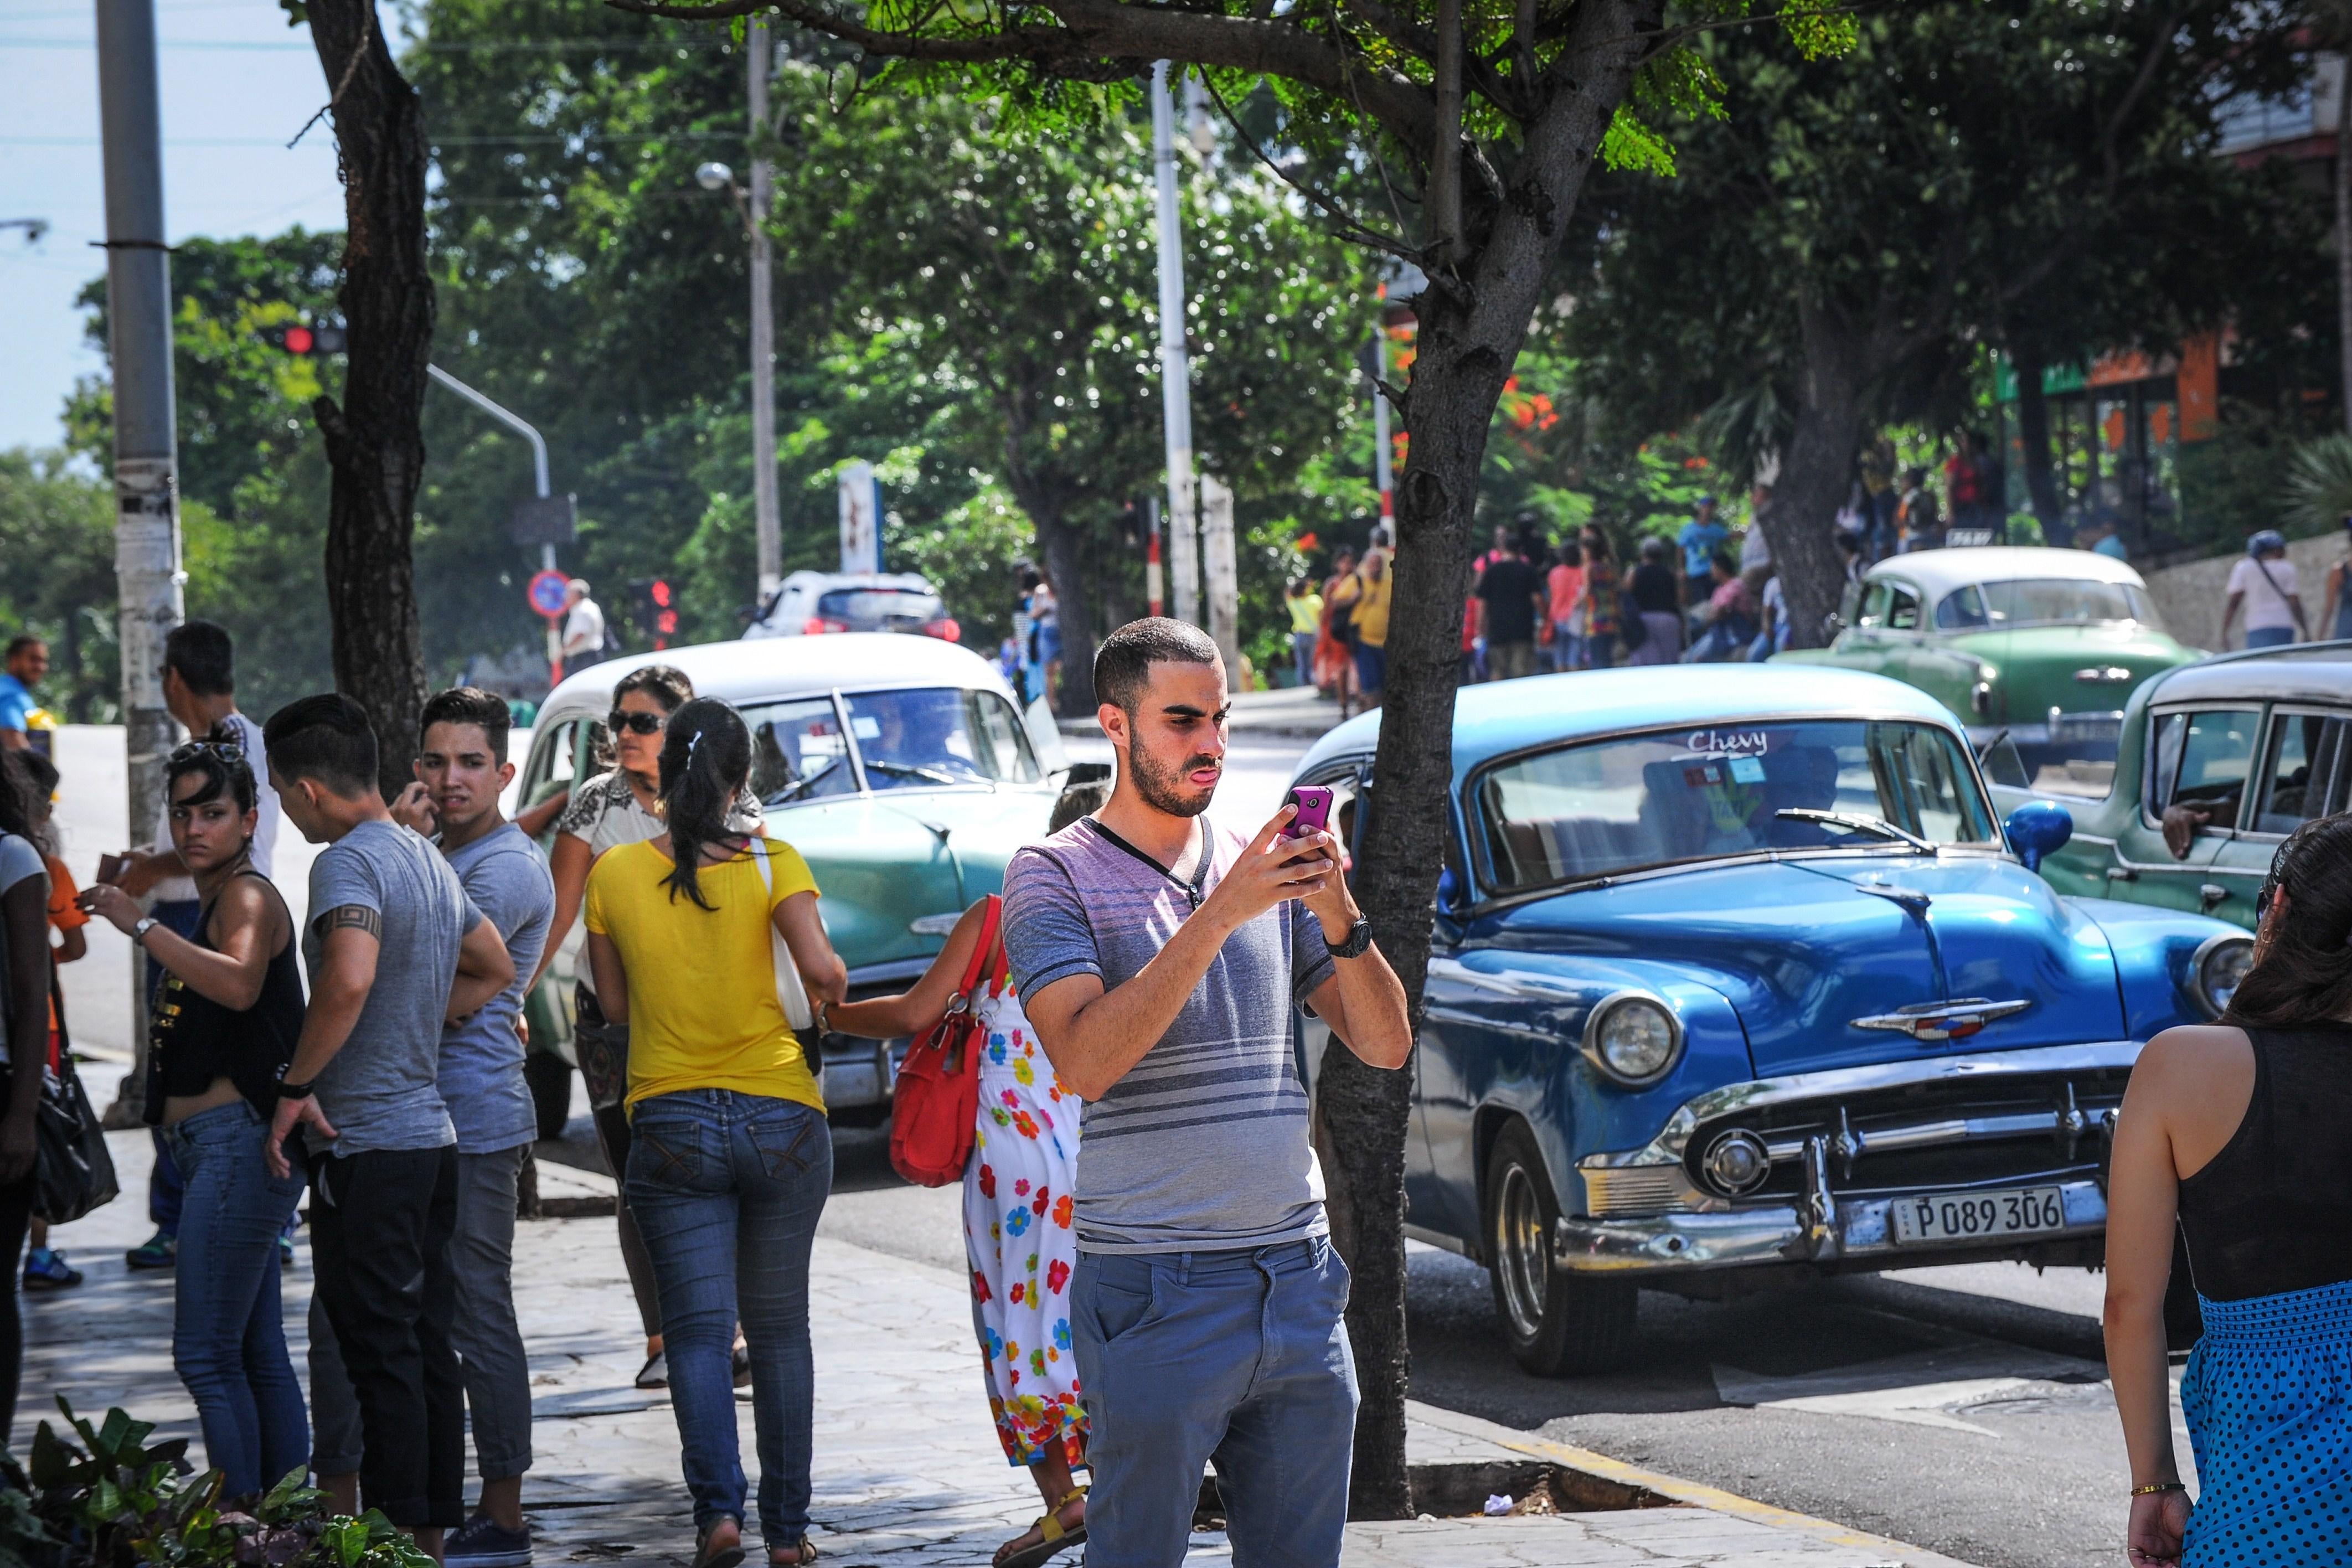 A man takes a picture with his mobile phone in Havana.